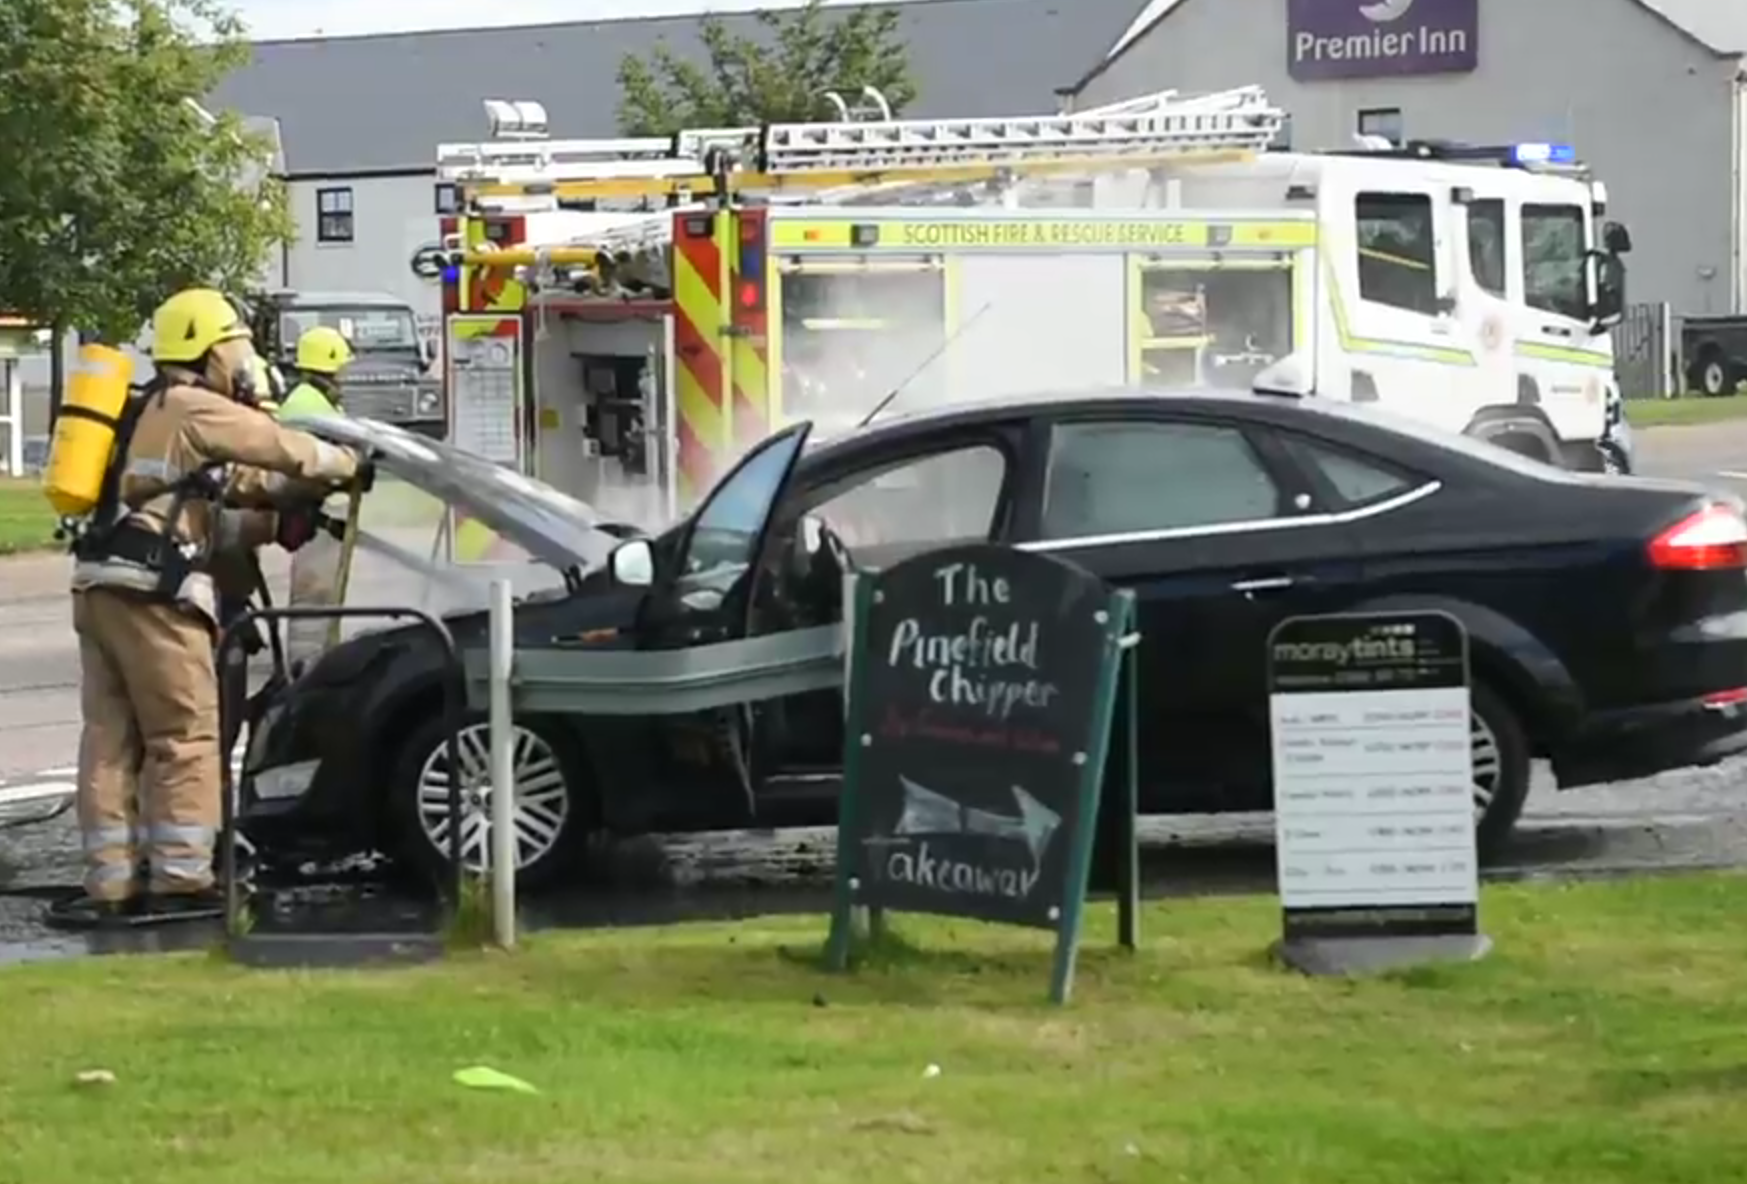 Firefighters battle the car fire in Elgin on the A96